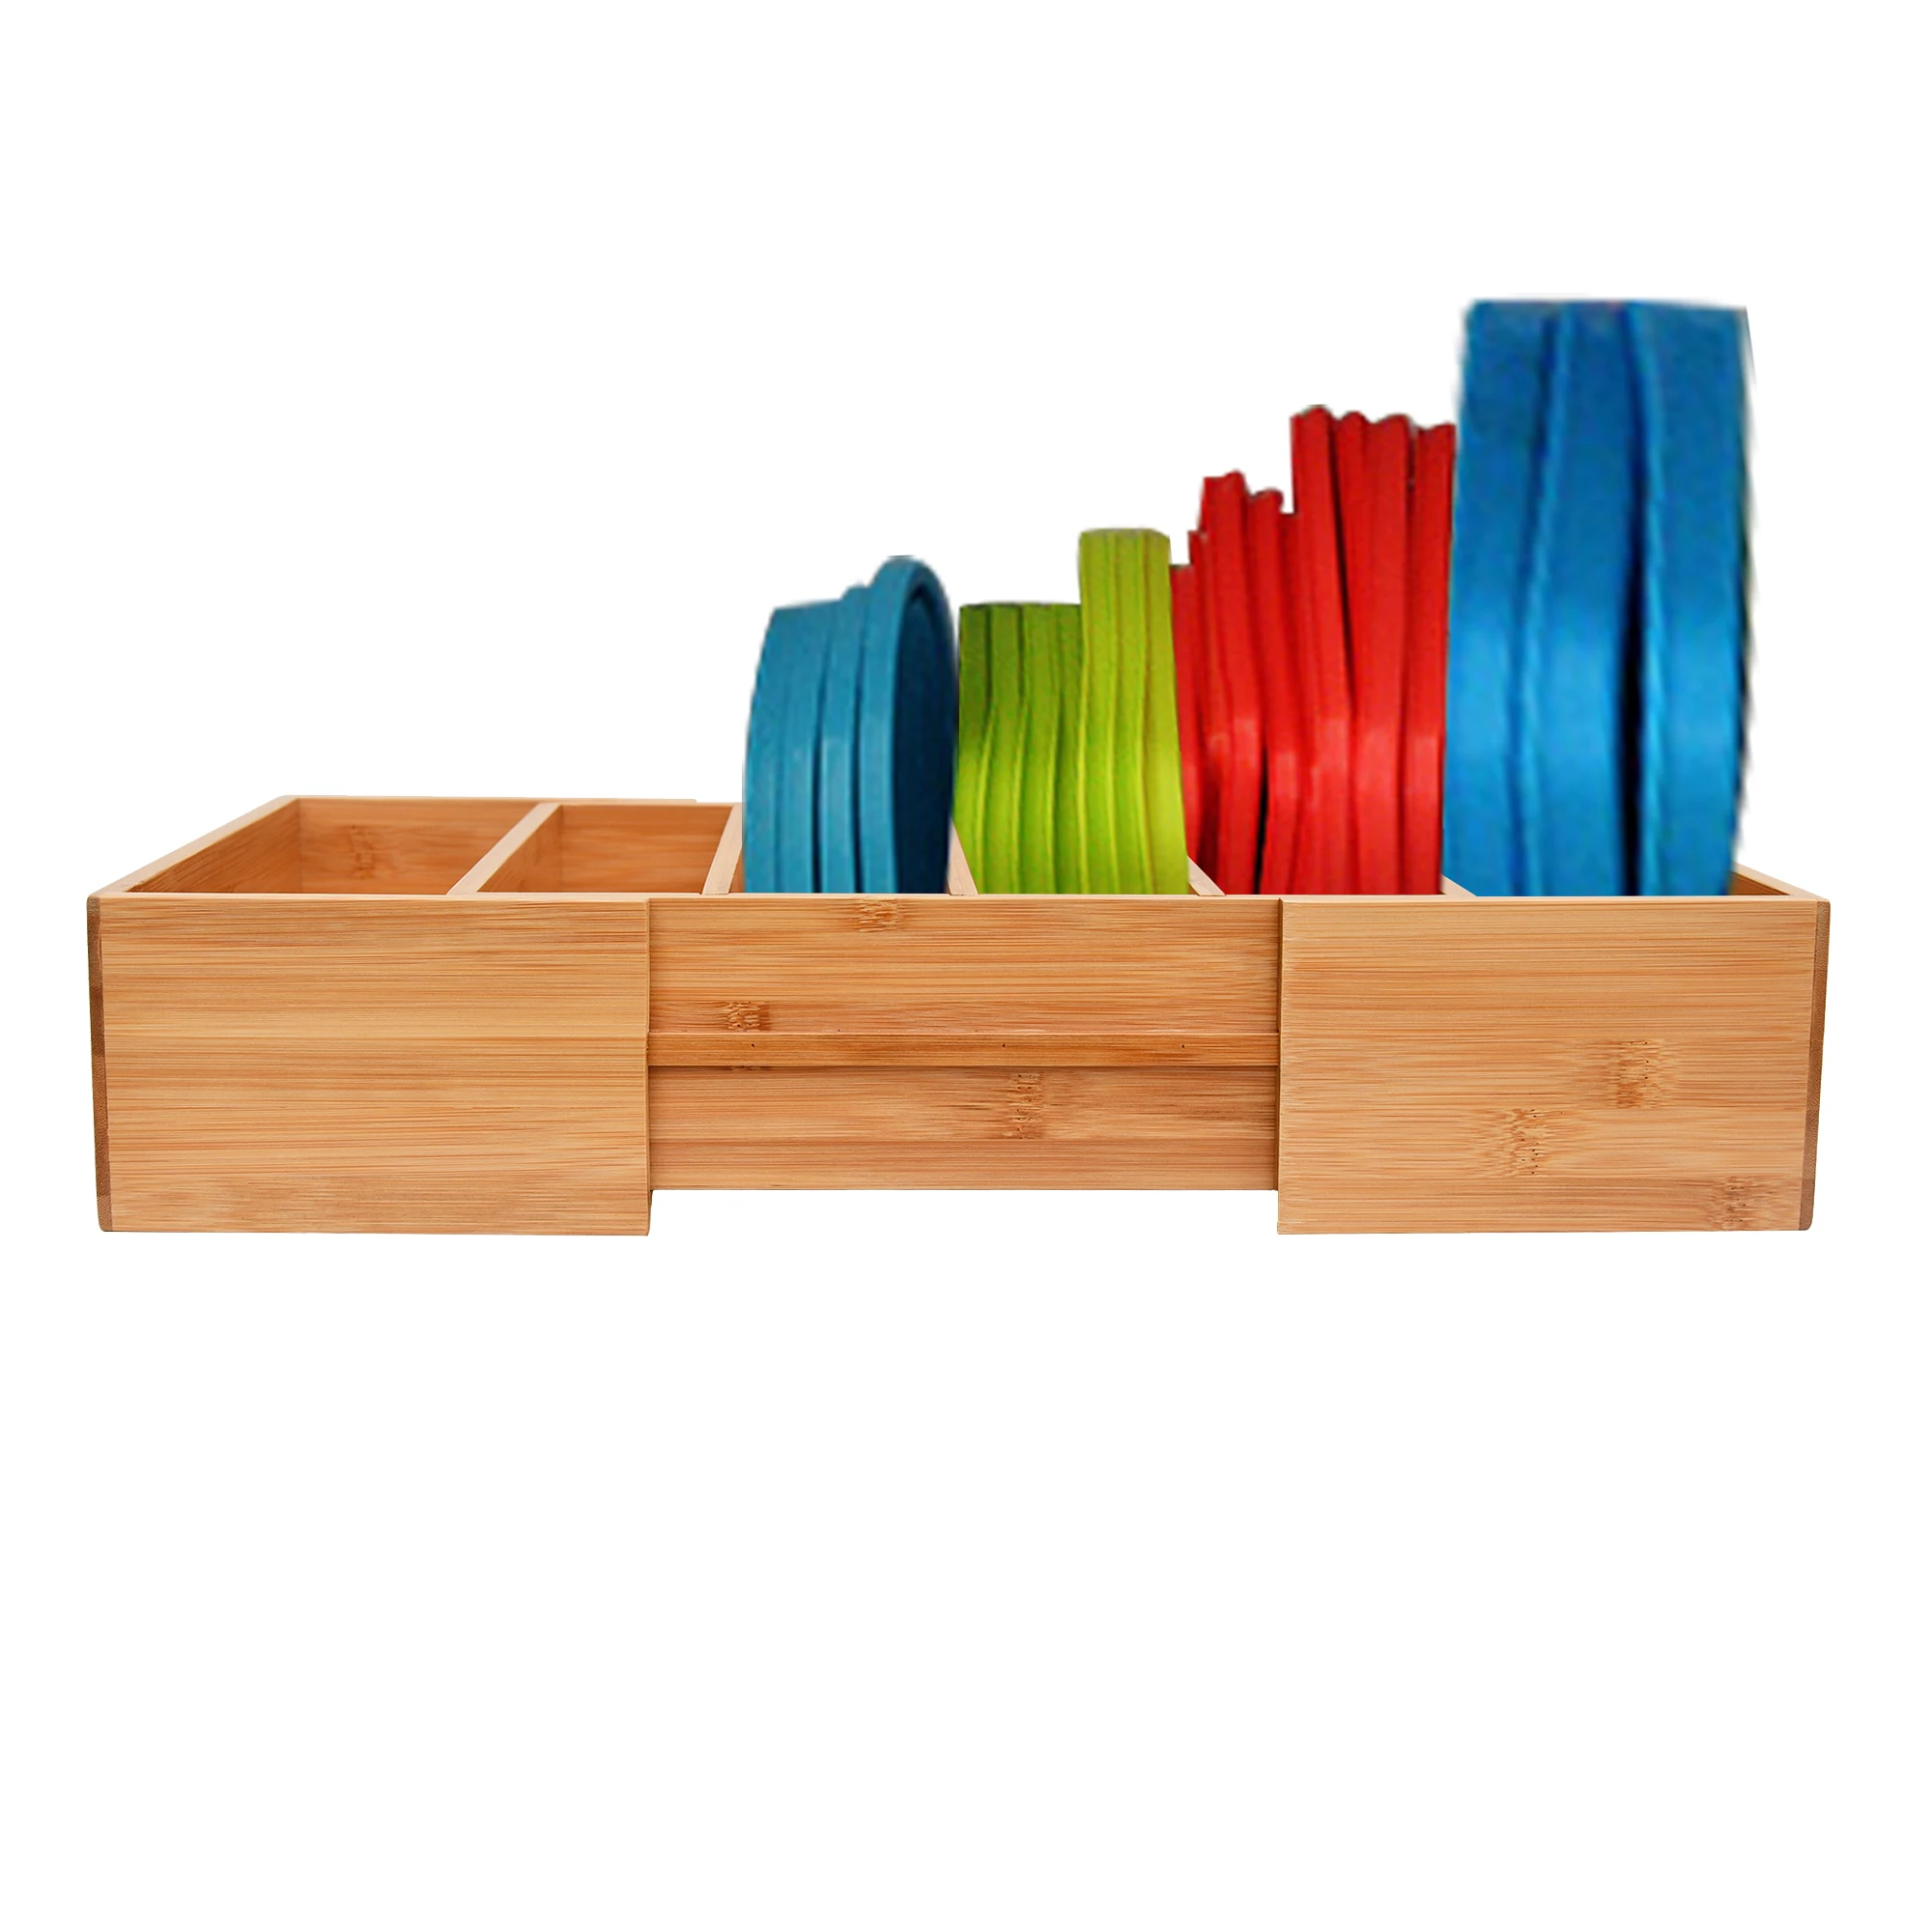 Wholesale Expandable Bamboo Pan and Pot Rack Holder Food Storage Container Lid Organizer for Kitchen Utensils